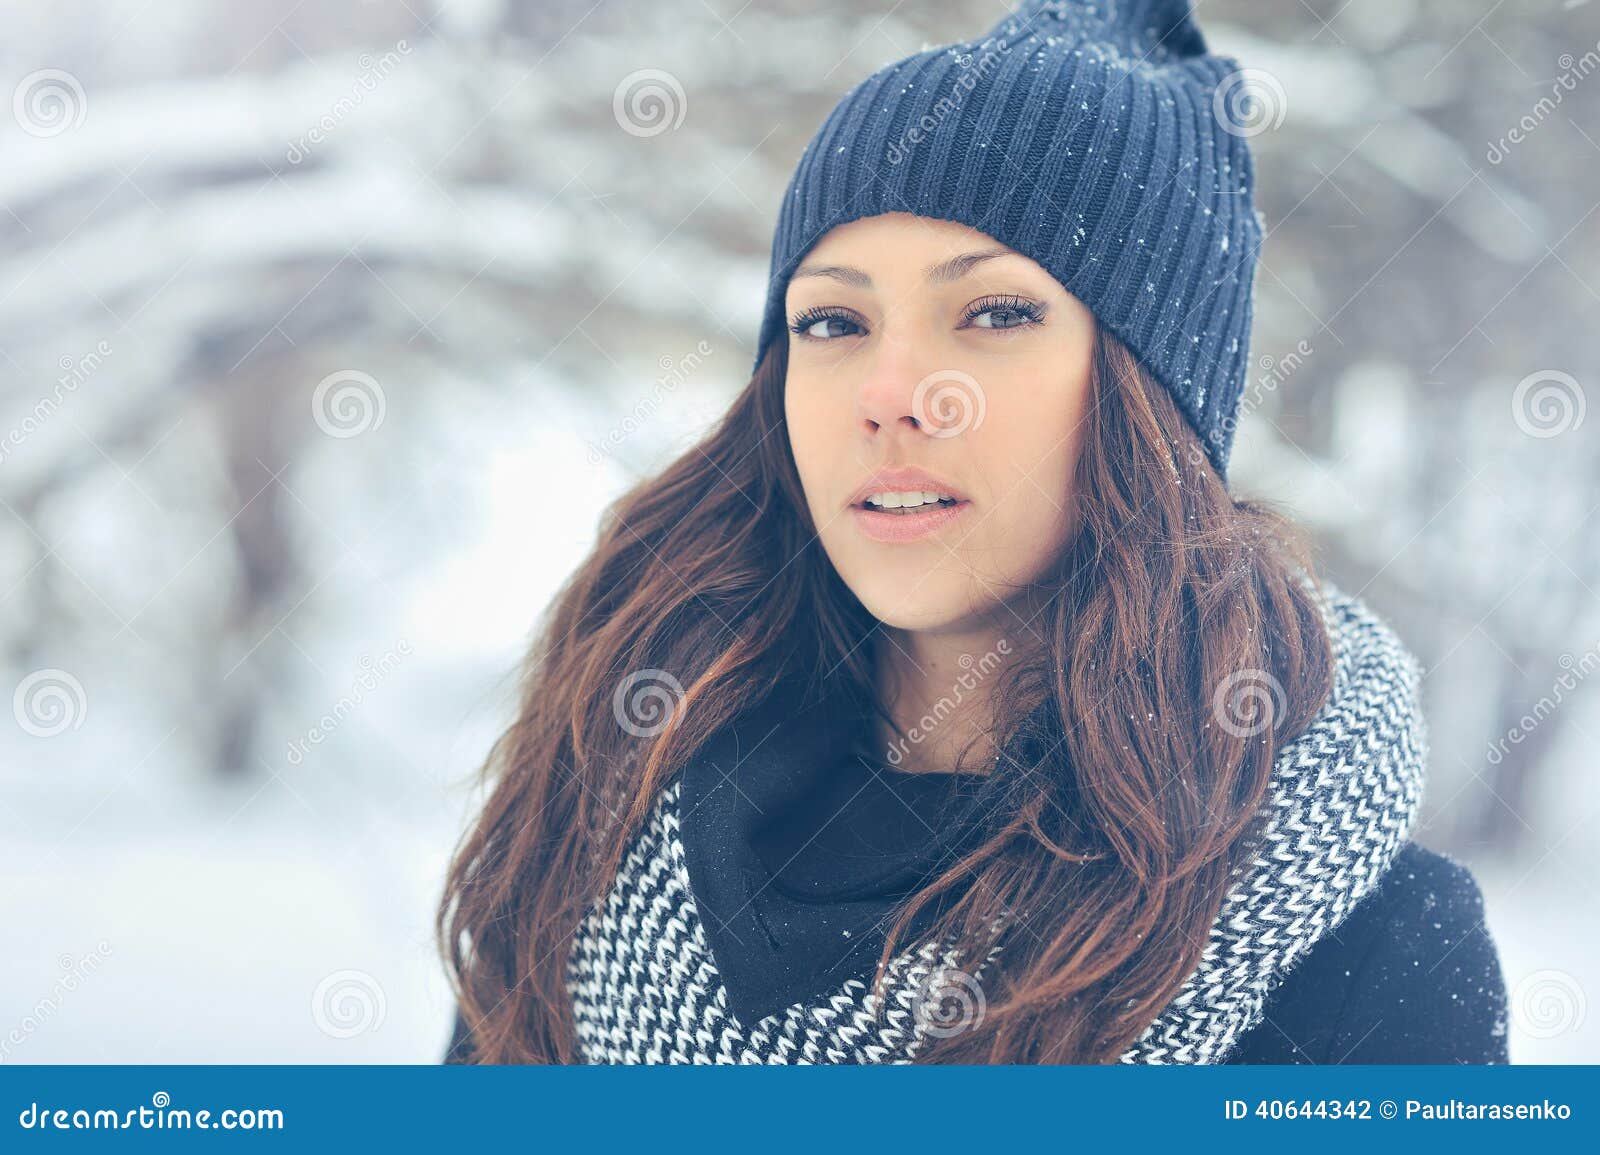 Young Woman Winter Portrait Stock Photo - Image of model, face: 40644342